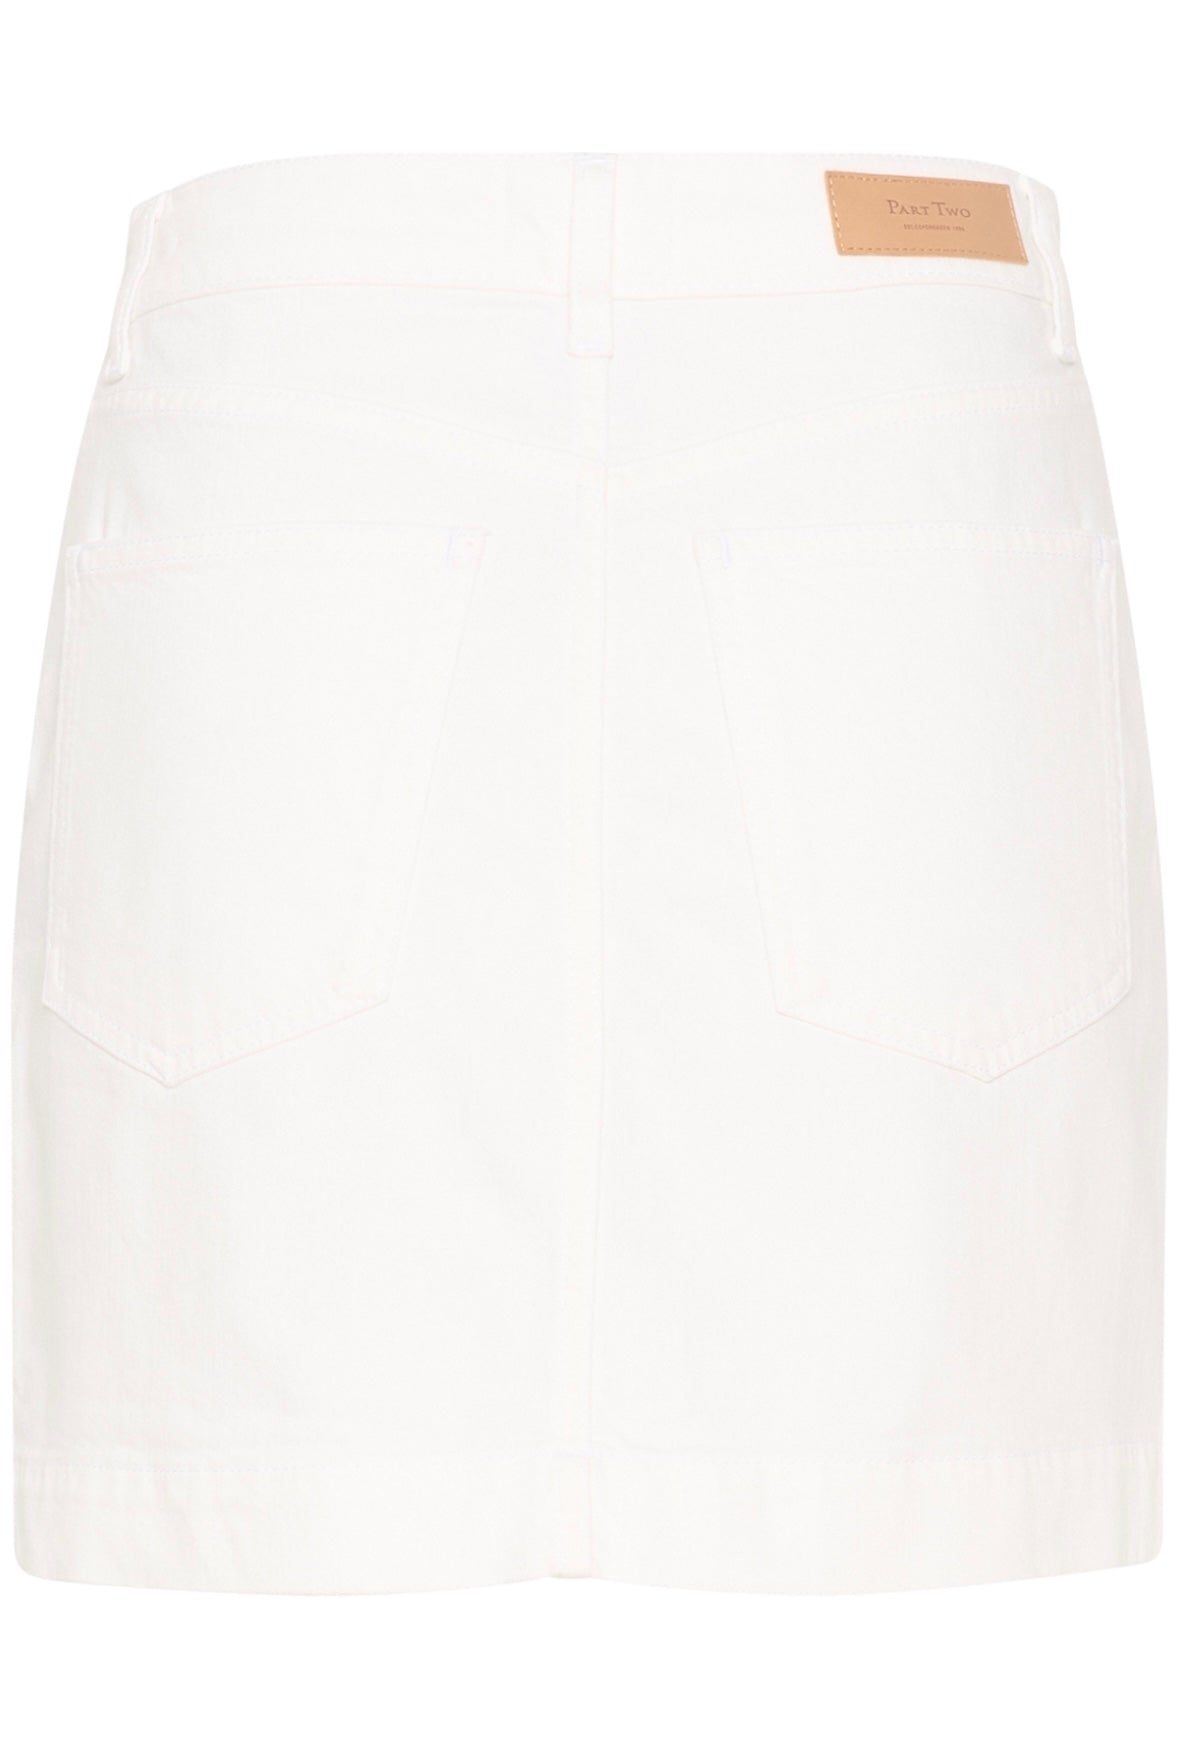 Part Two Ece skirt - Bright White